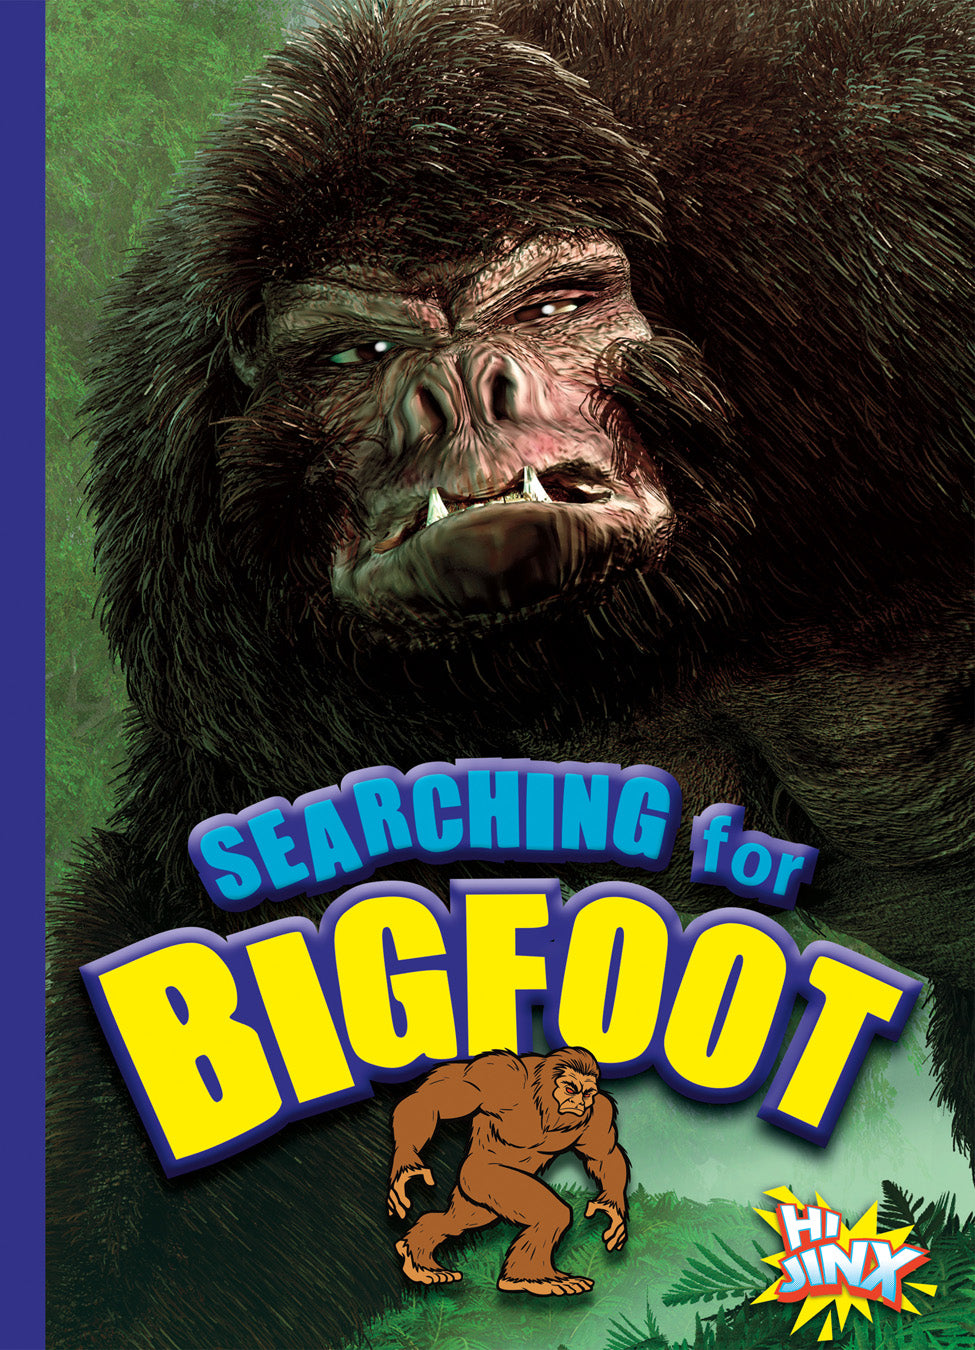 On the Paranormal Hunt: Searching for Bigfoot